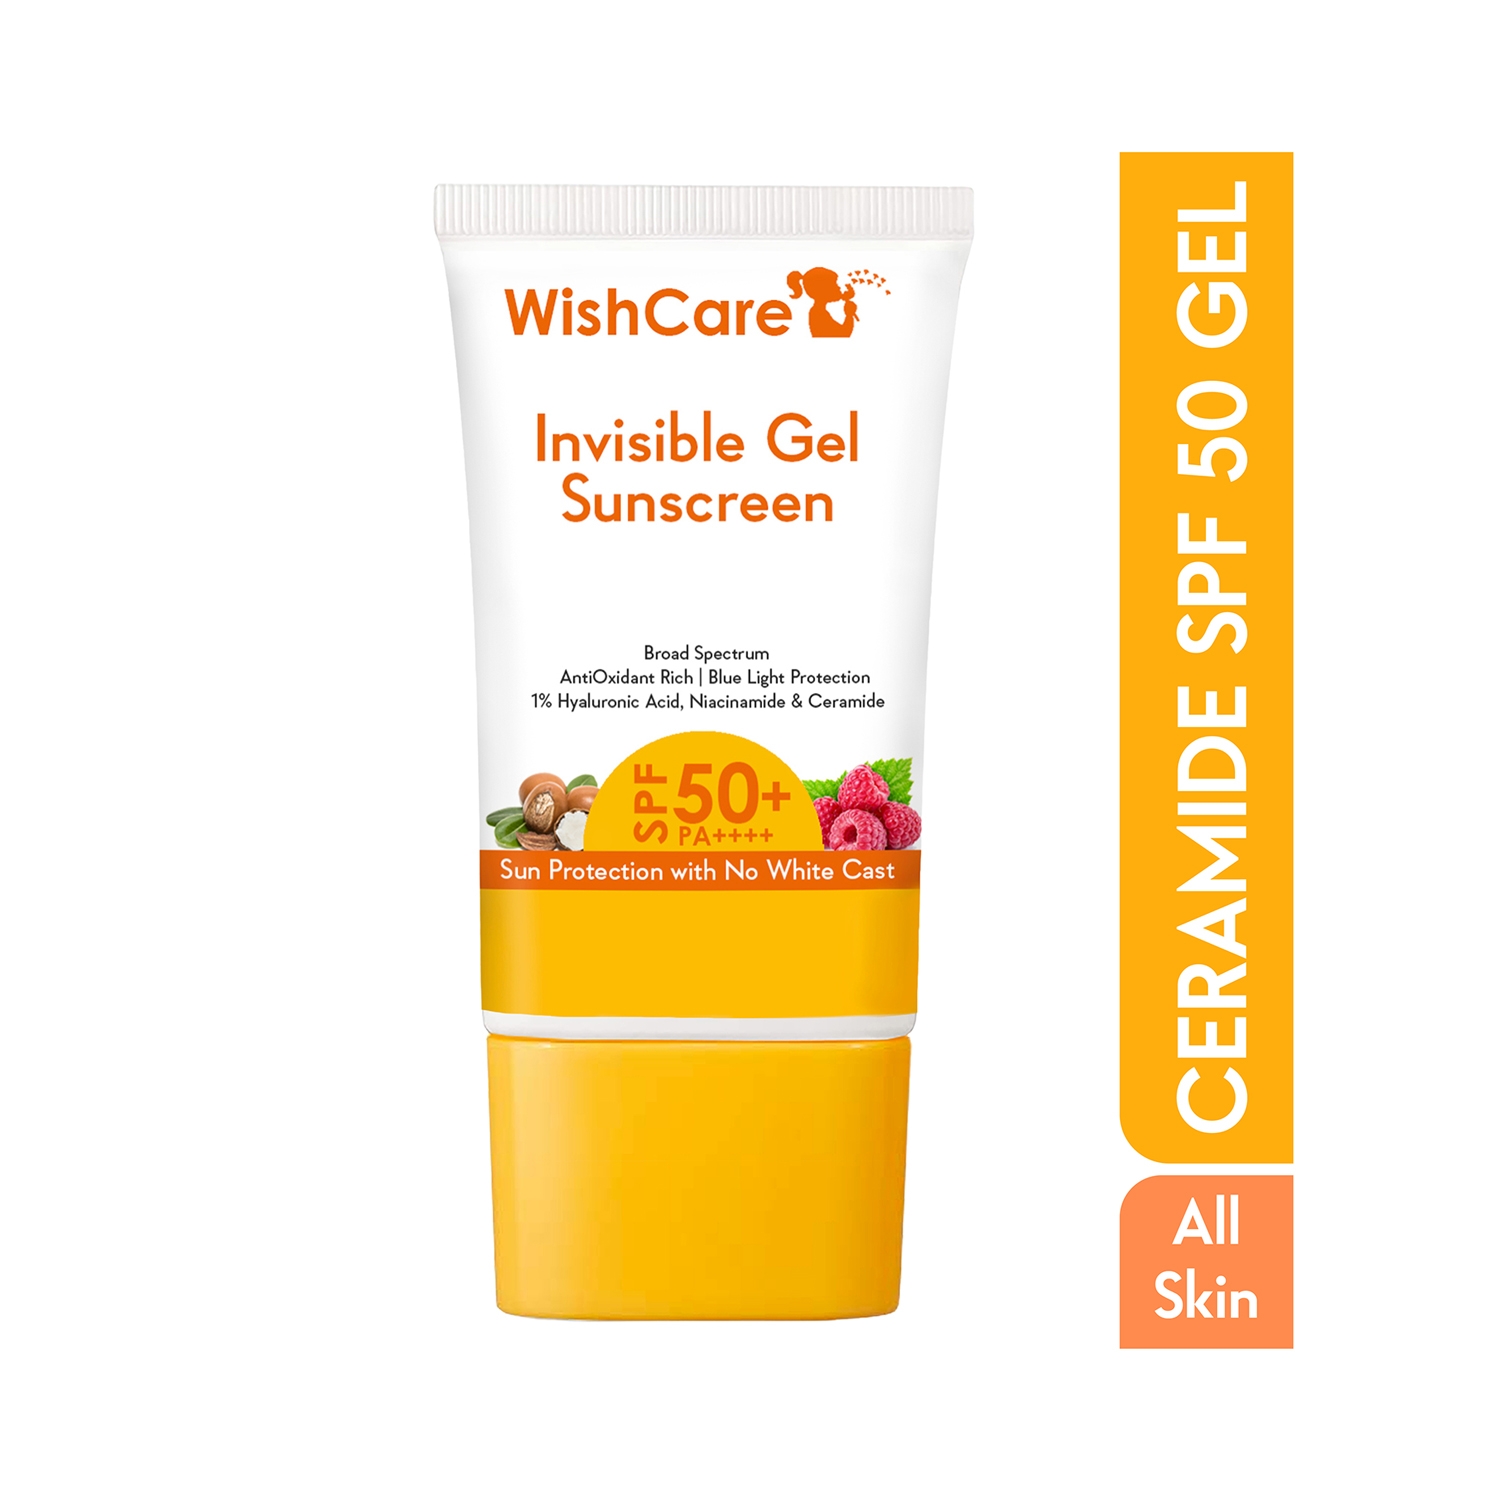 WishCare Invisible Gel Sunscreen SPF 50+ PA++++ - Oil Free with